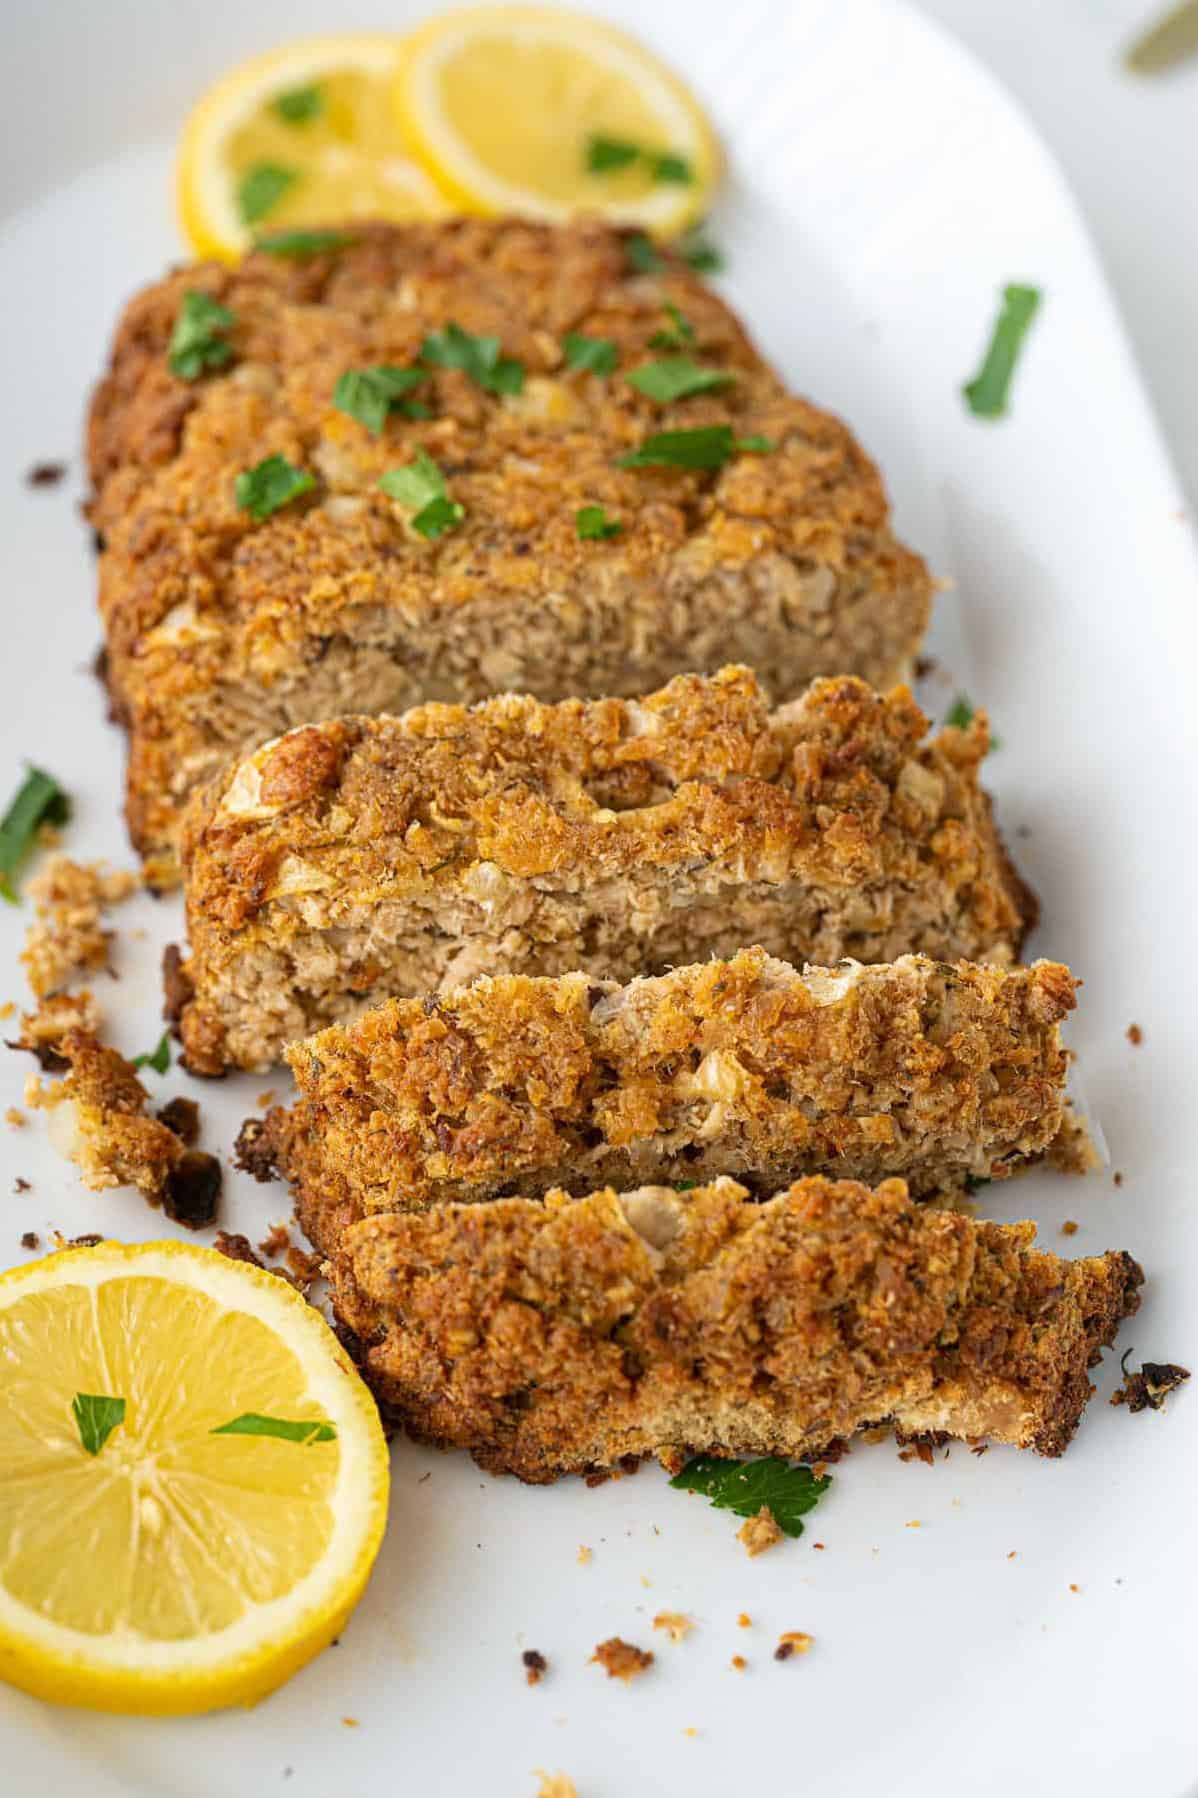  Serve up a slice of this inviting and filling salmon loaf, perfect for a cozy night in or an extravagant dinner party.